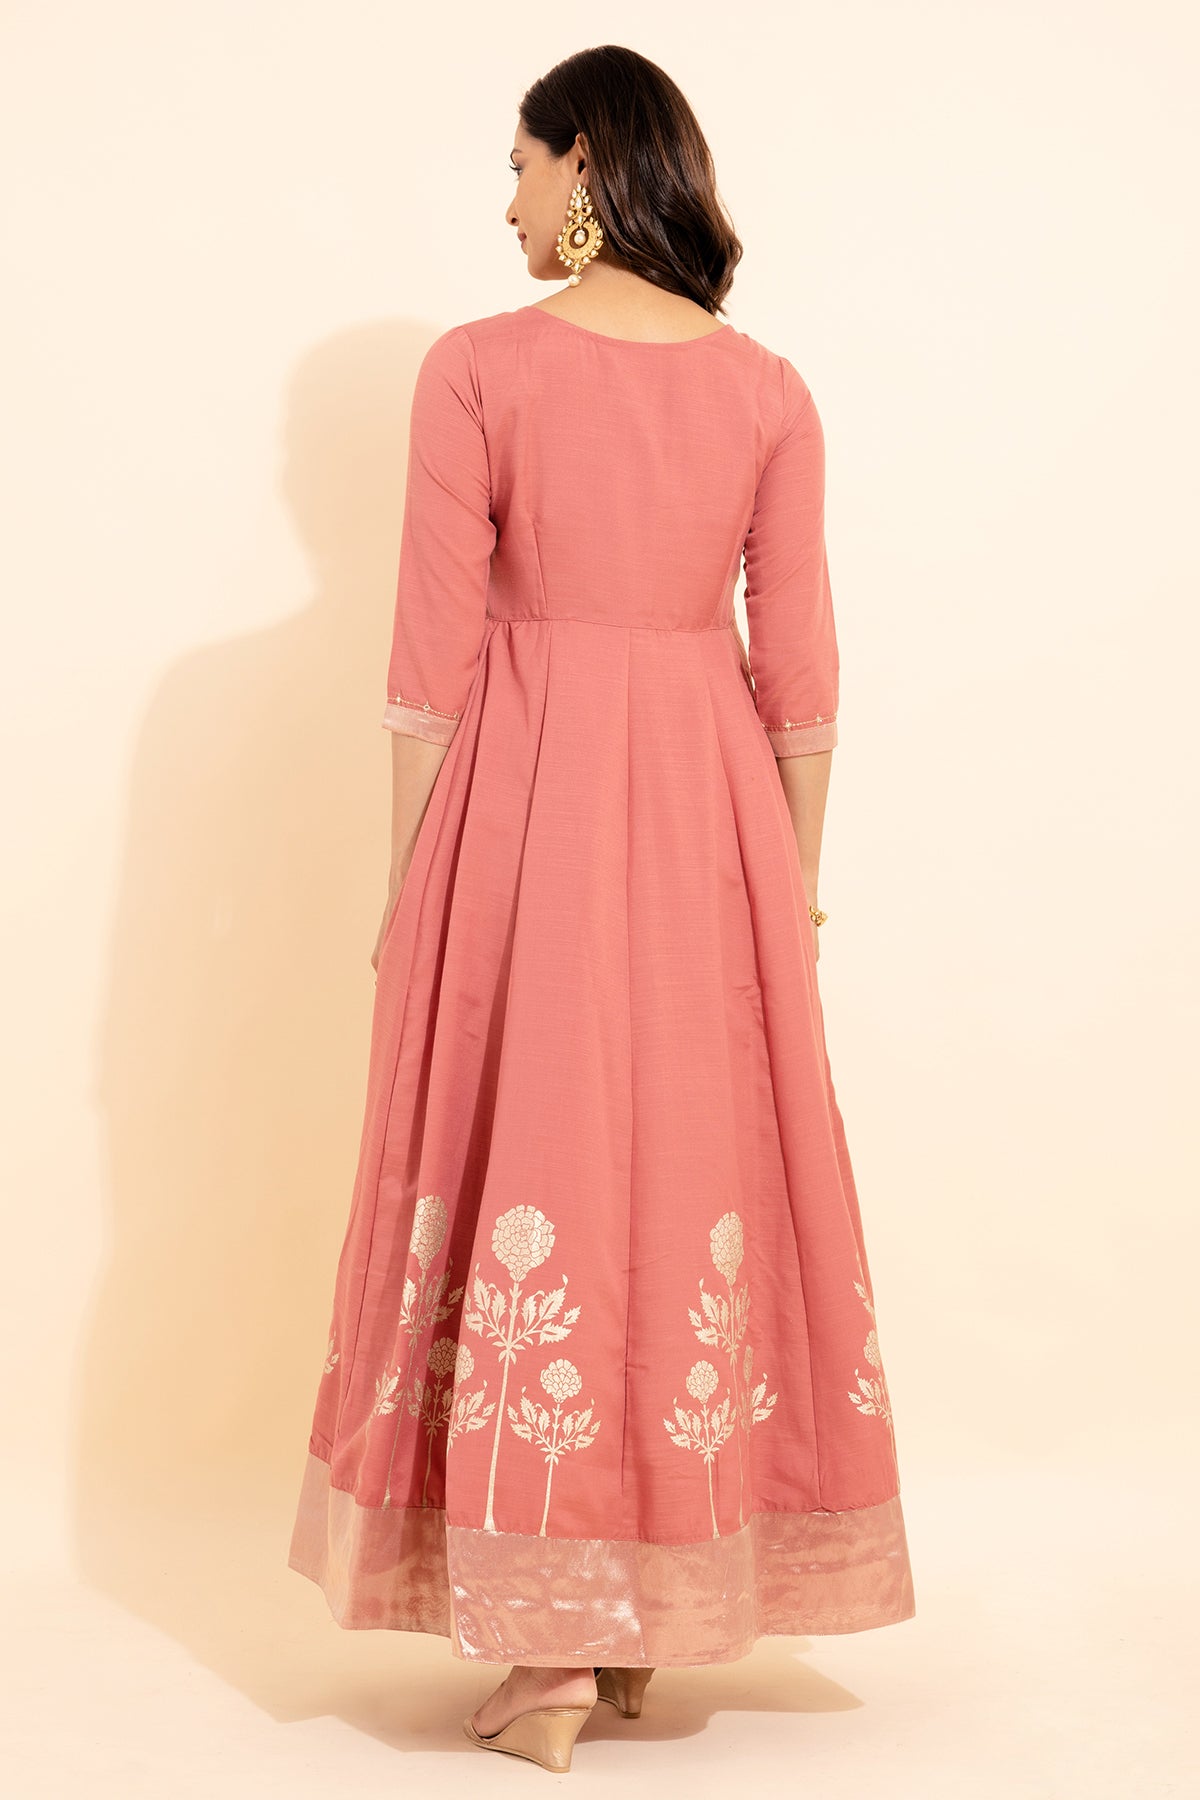 Goemetric Embroidery With Floral Printed Anarkali - Pink